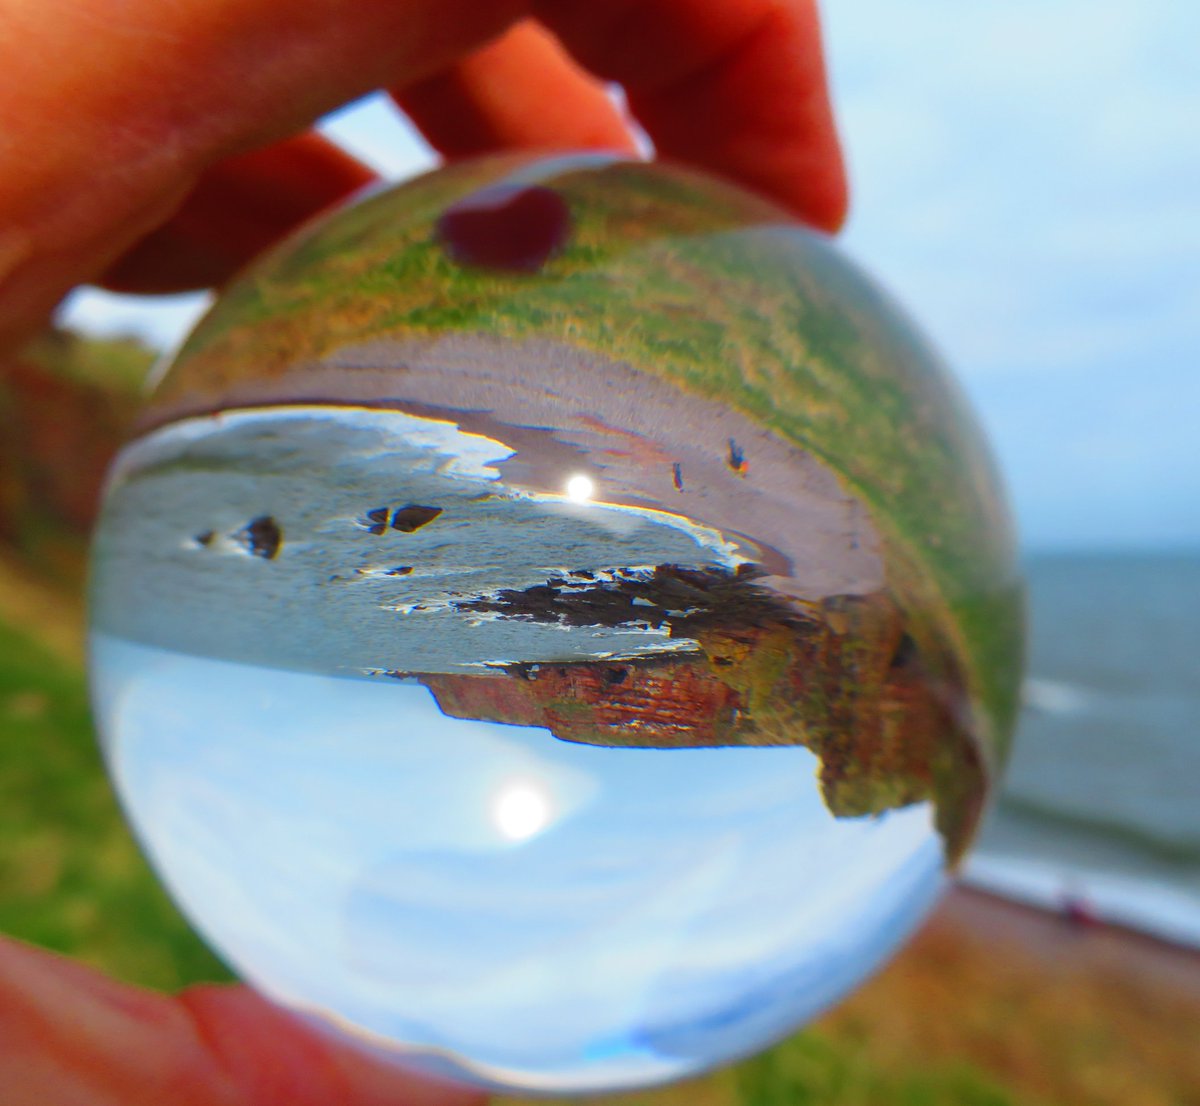 First attempt taking a photo with a crystal ball. Auchmithie #SocialDistancing at its best 😍Not #BondiBeach.

#crystalballphotography #crystalballphoto #auchmithie #angus #anguscoastline #visitdundeeandangus #visitdanda